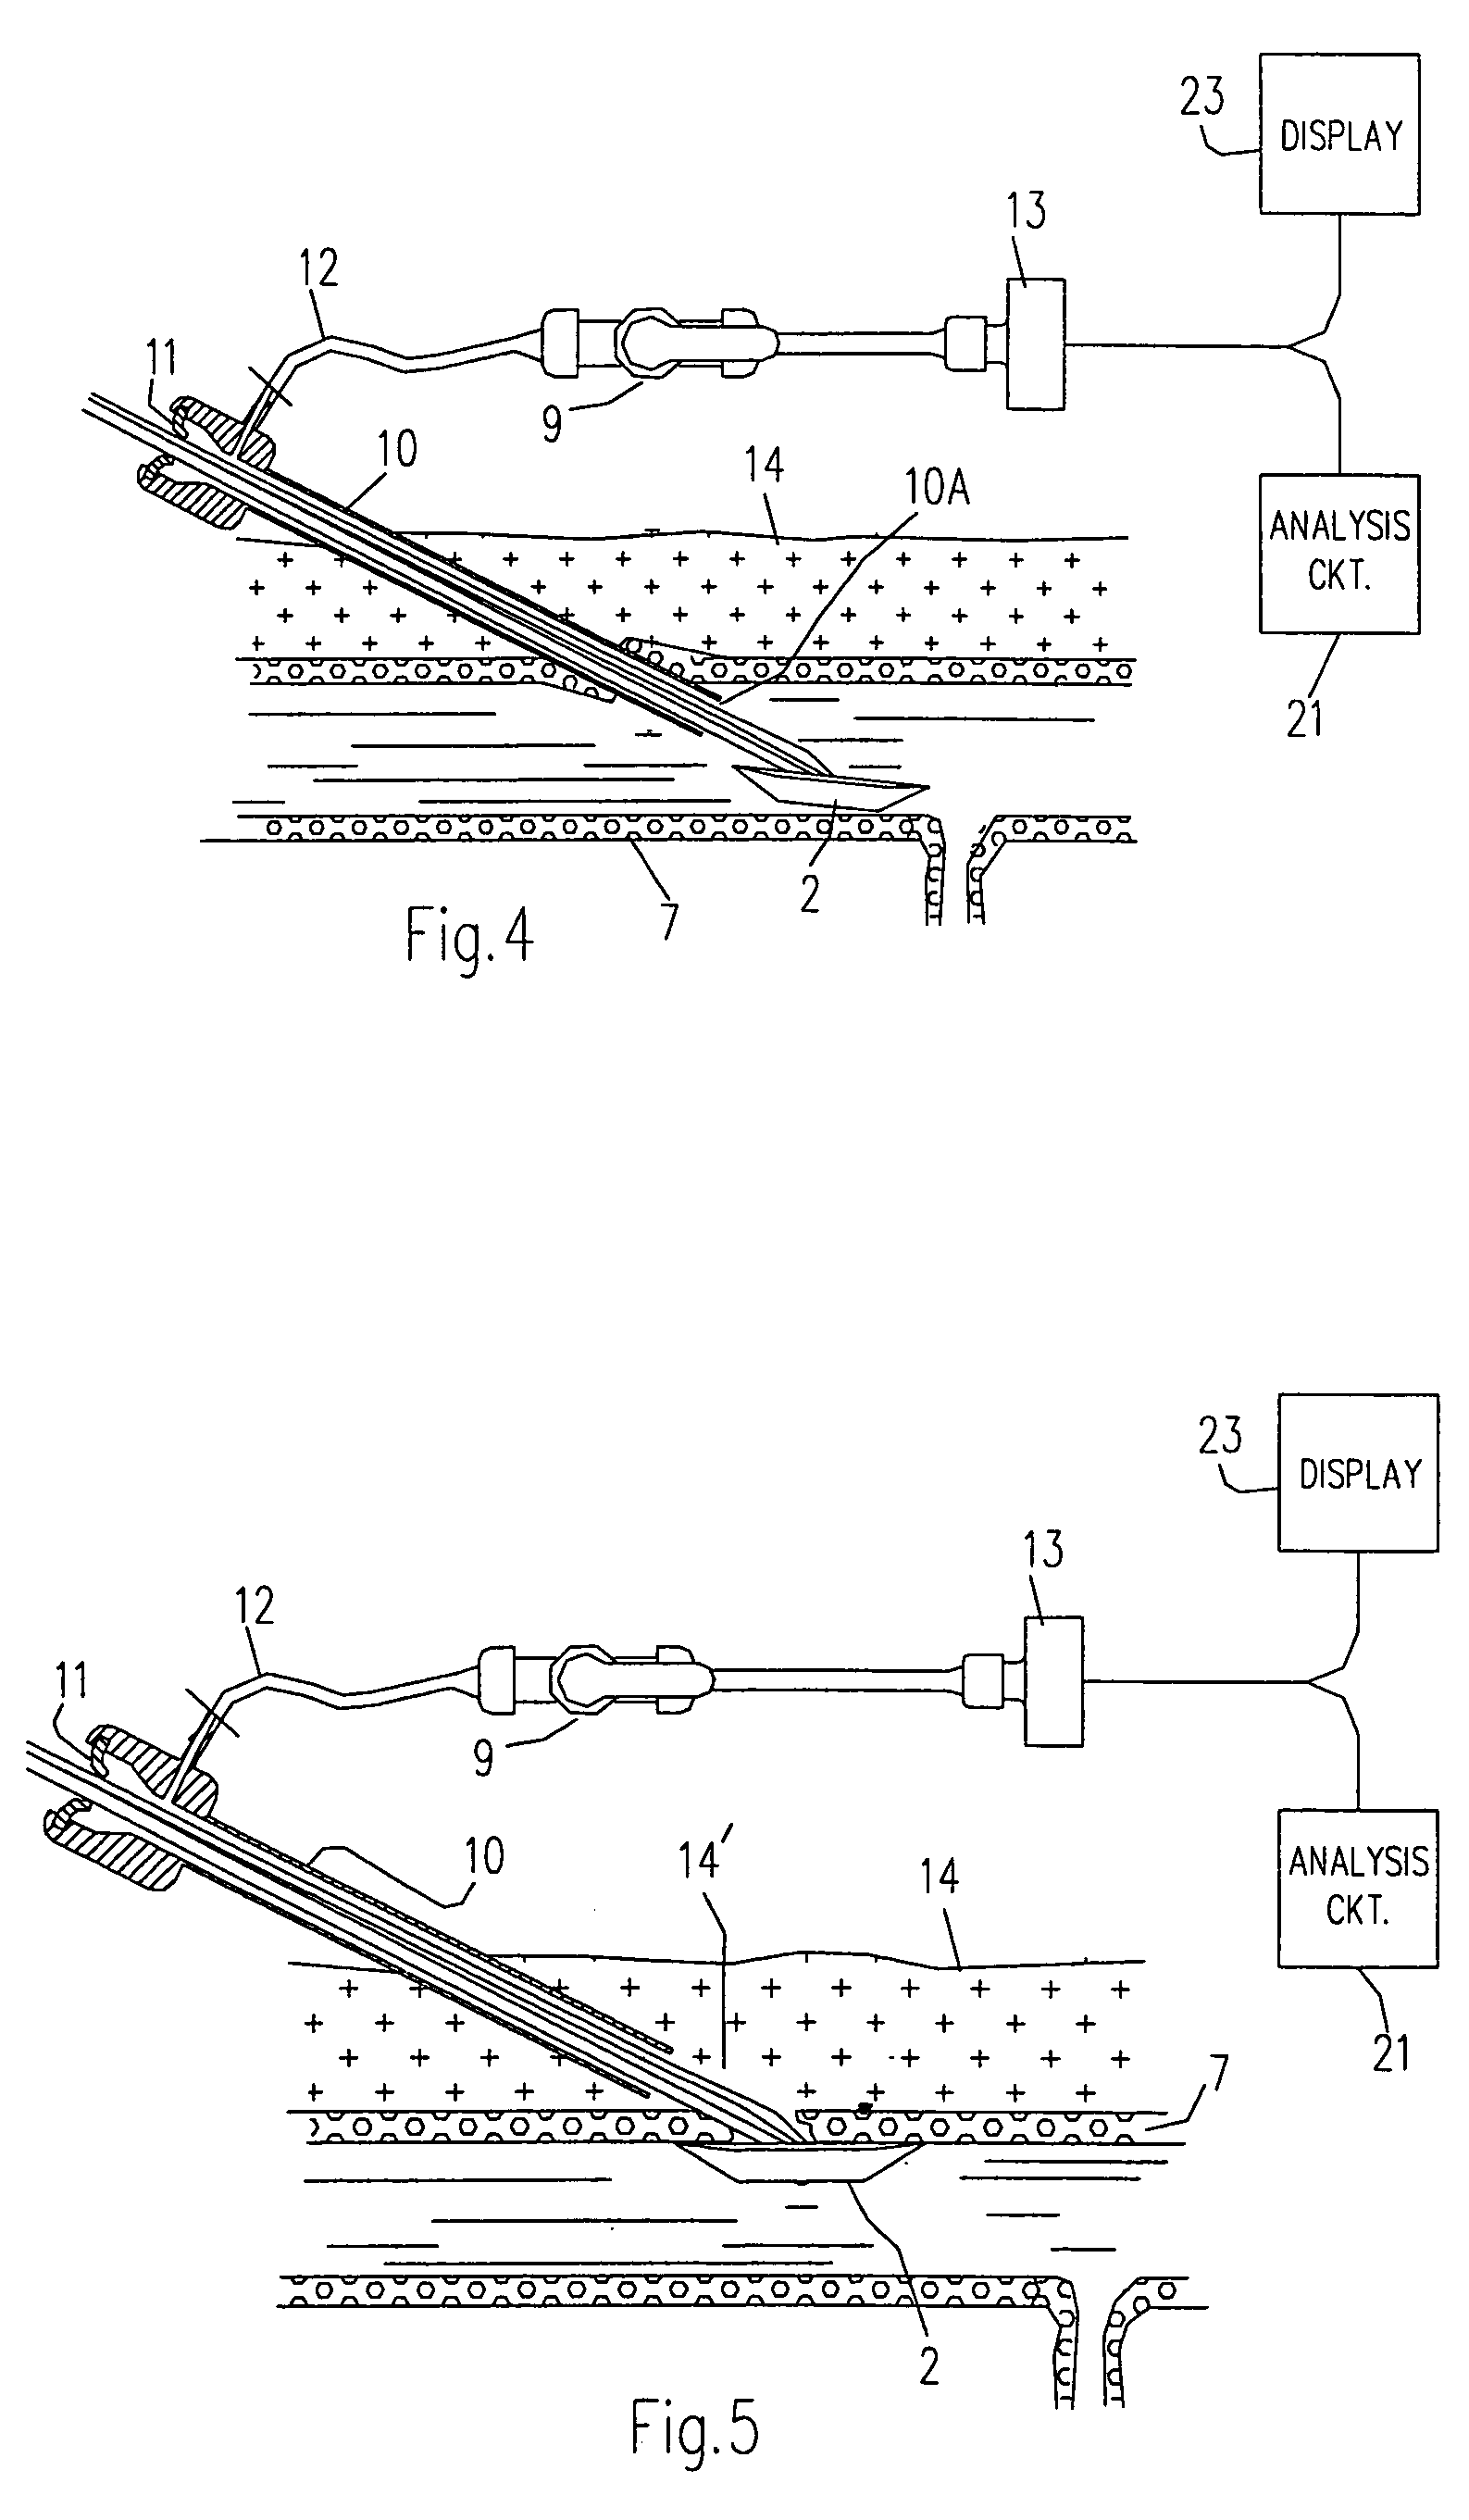 Technique to confirm correct positioning of arterial wall sealing device